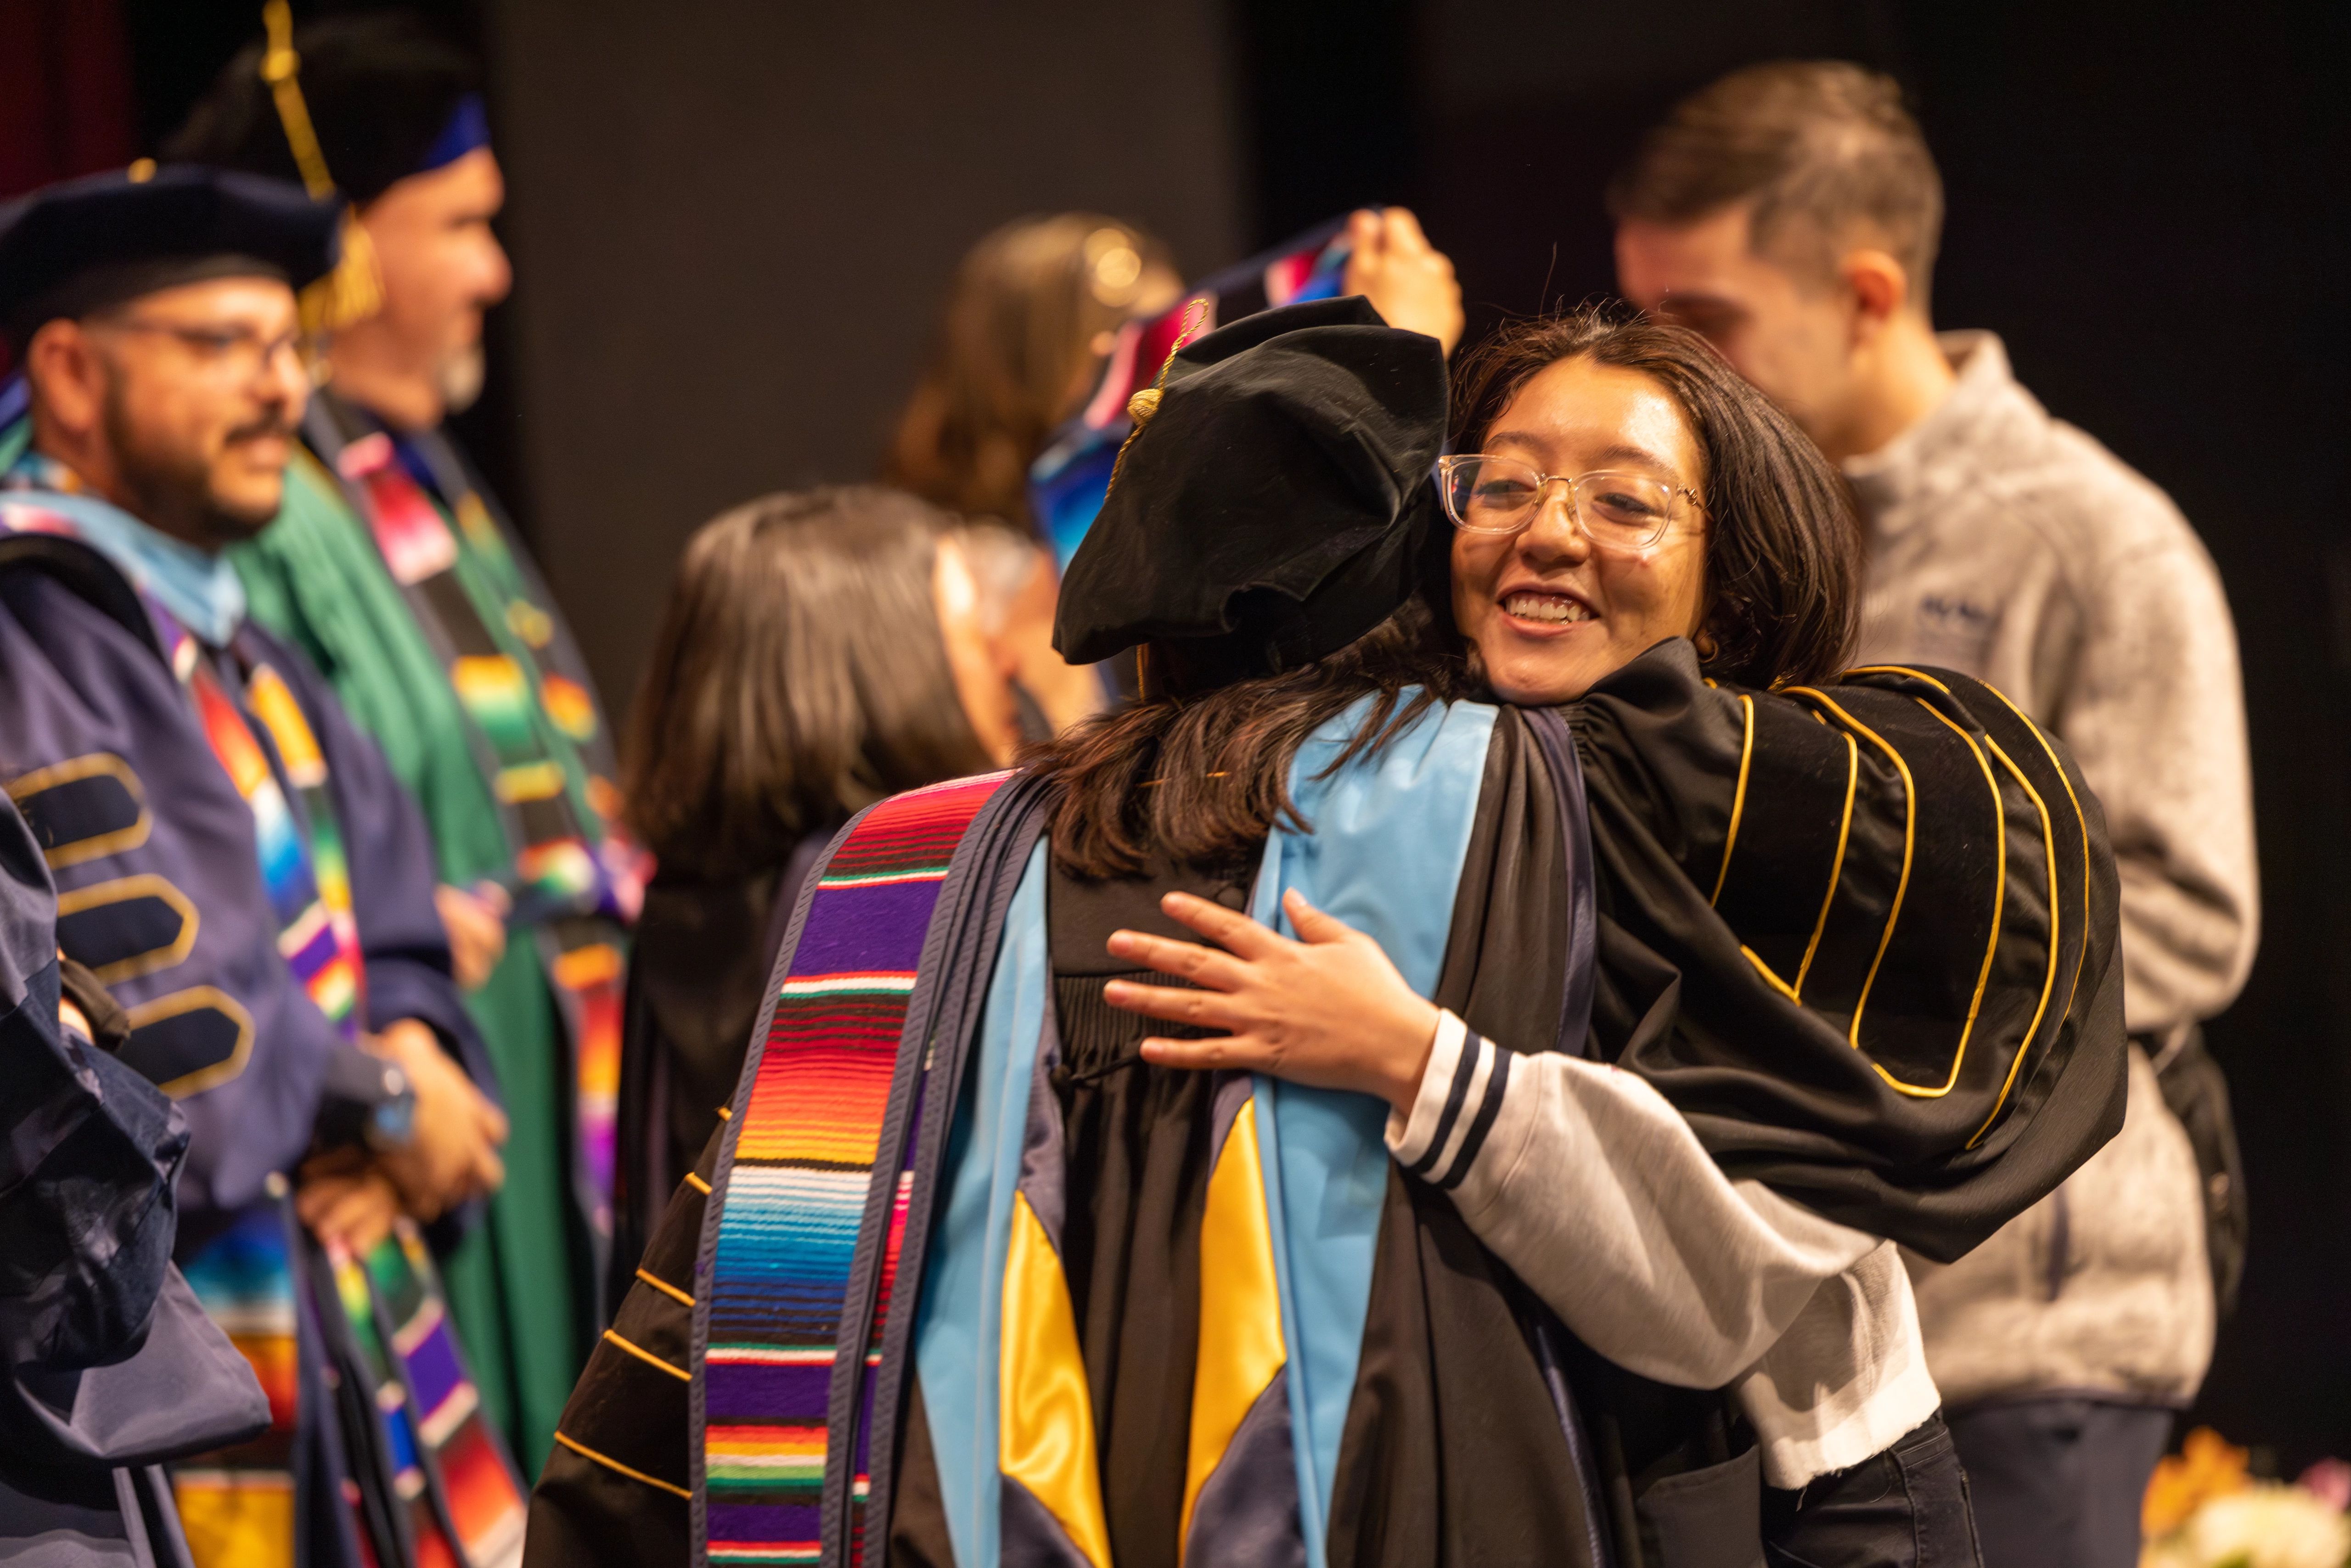 Two people hugging at the convocation.